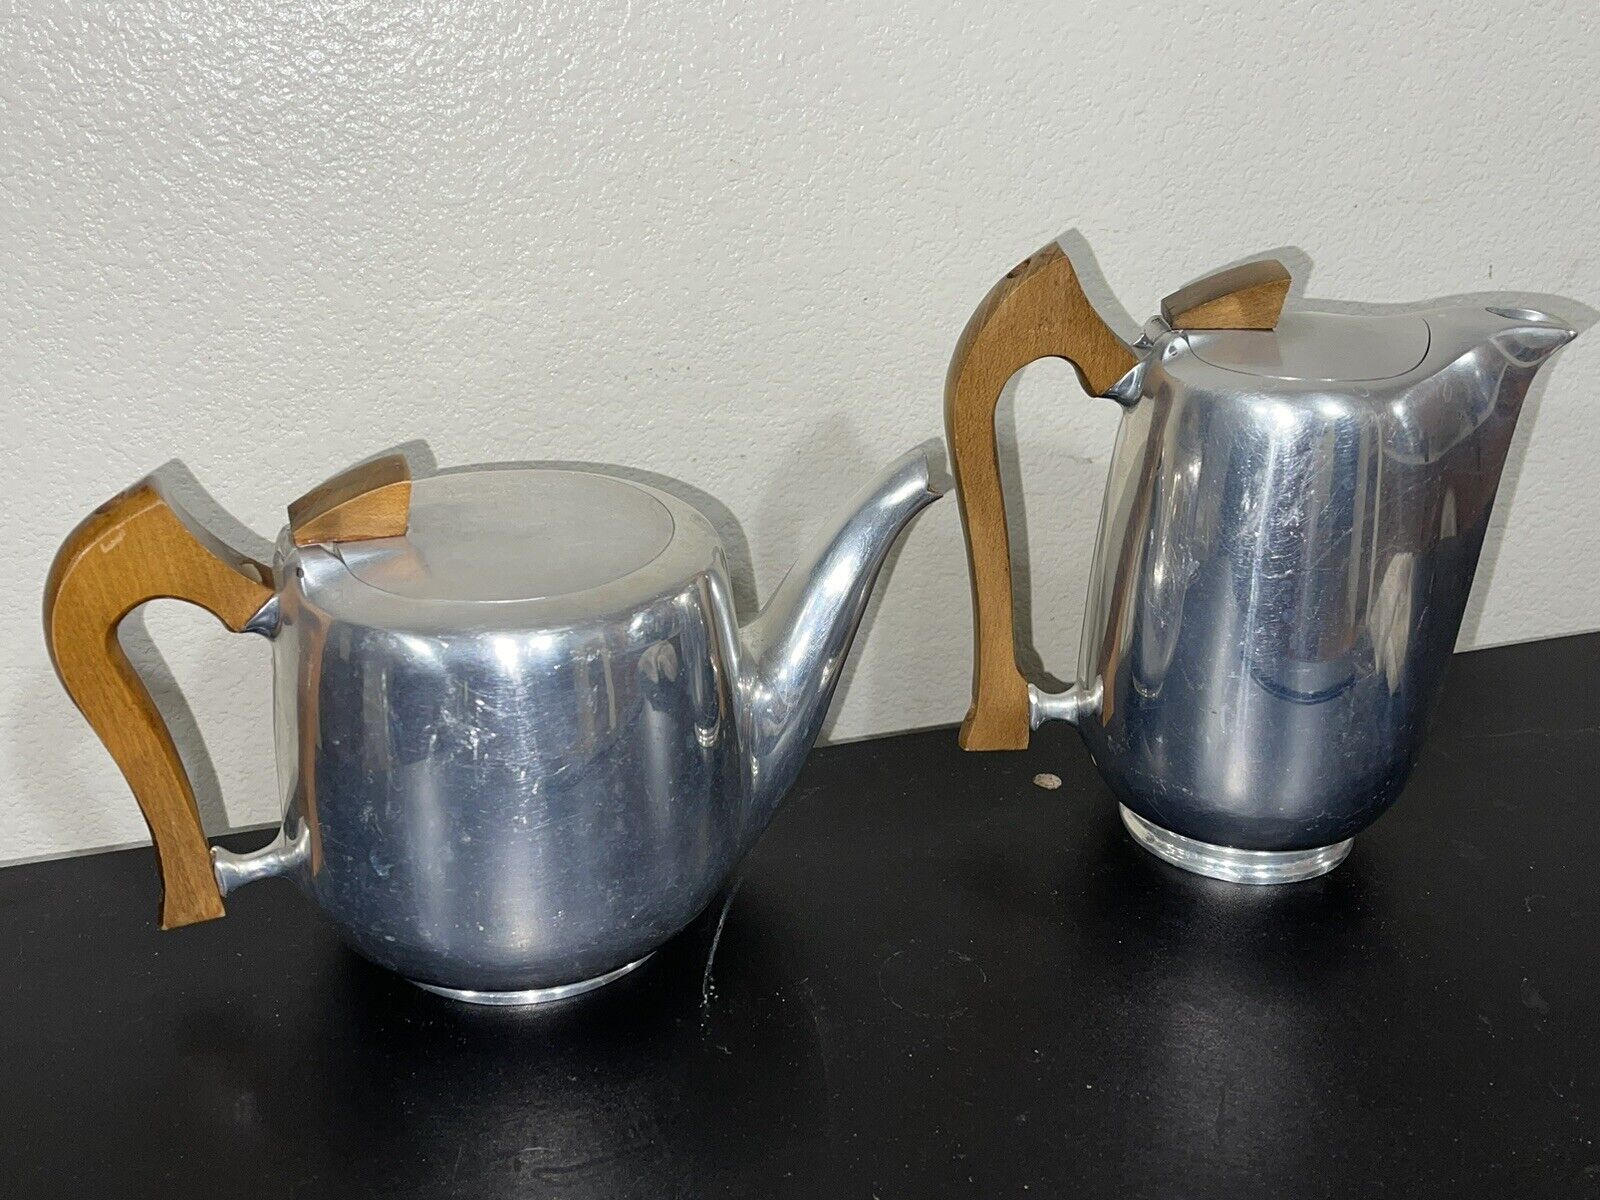 Vtg Mid-Century Picquot Ware Teapot & Coffee Pot Aluminum & Wood Made in England